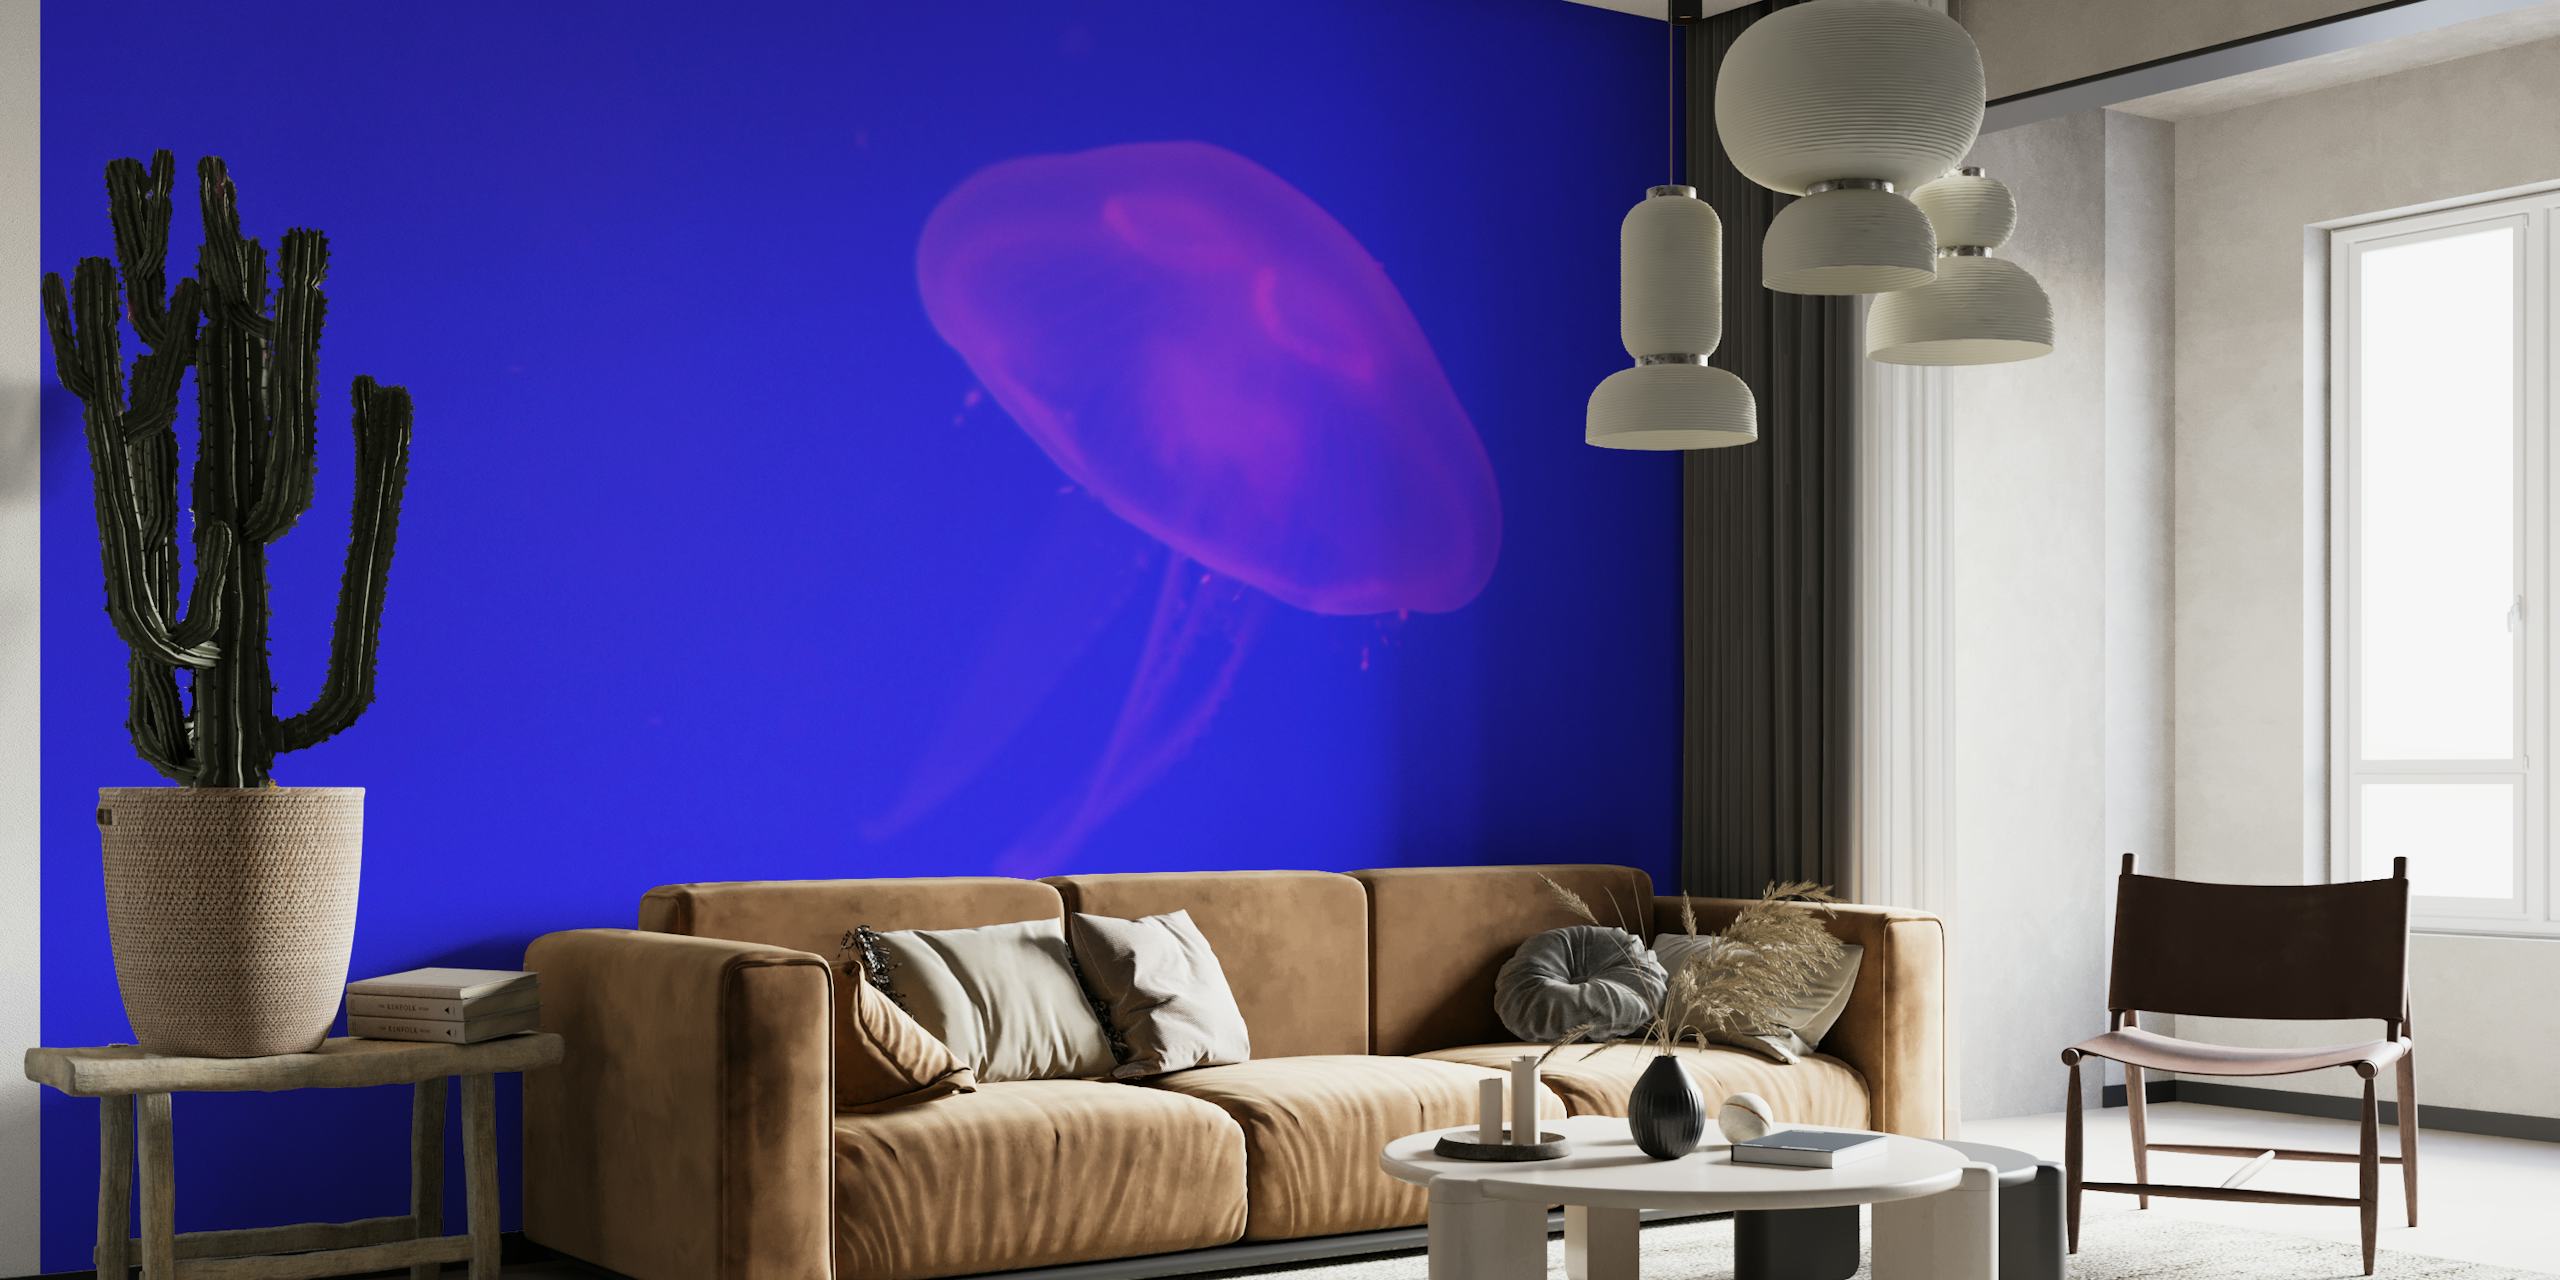 Jellyfish swimming in blue water wall mural